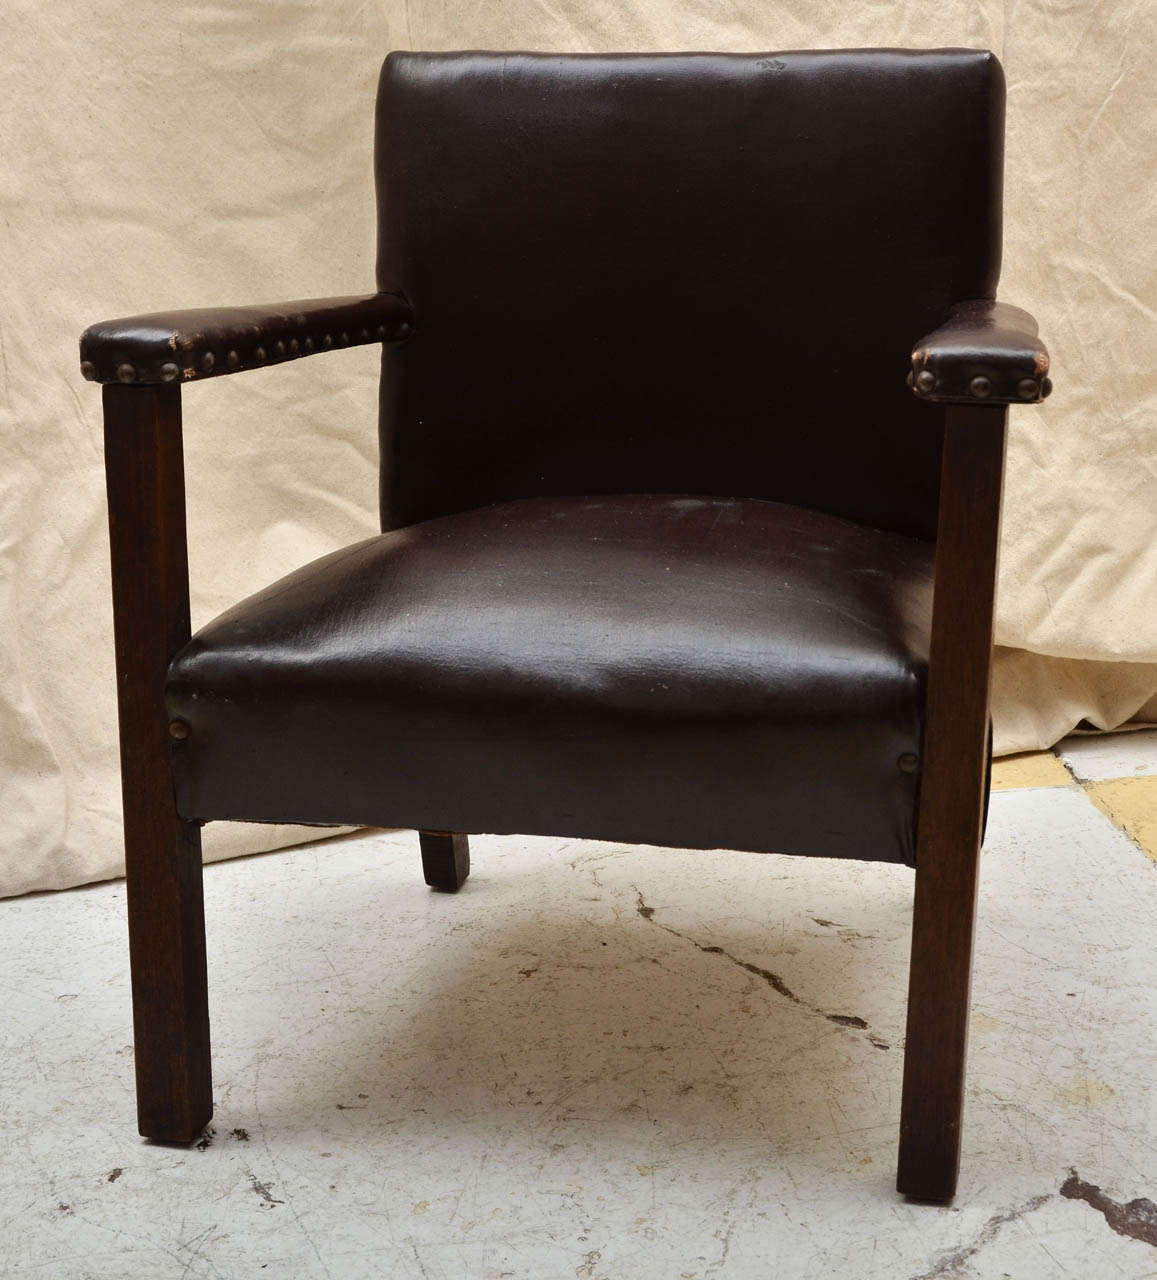 English Handmade Early 20Th Cent. Platform Armchair Covered in Naugahyde With Nailheads. Legs & Arm Supports Made From Hand Hewn Mahogany. Great As Decorative Piece